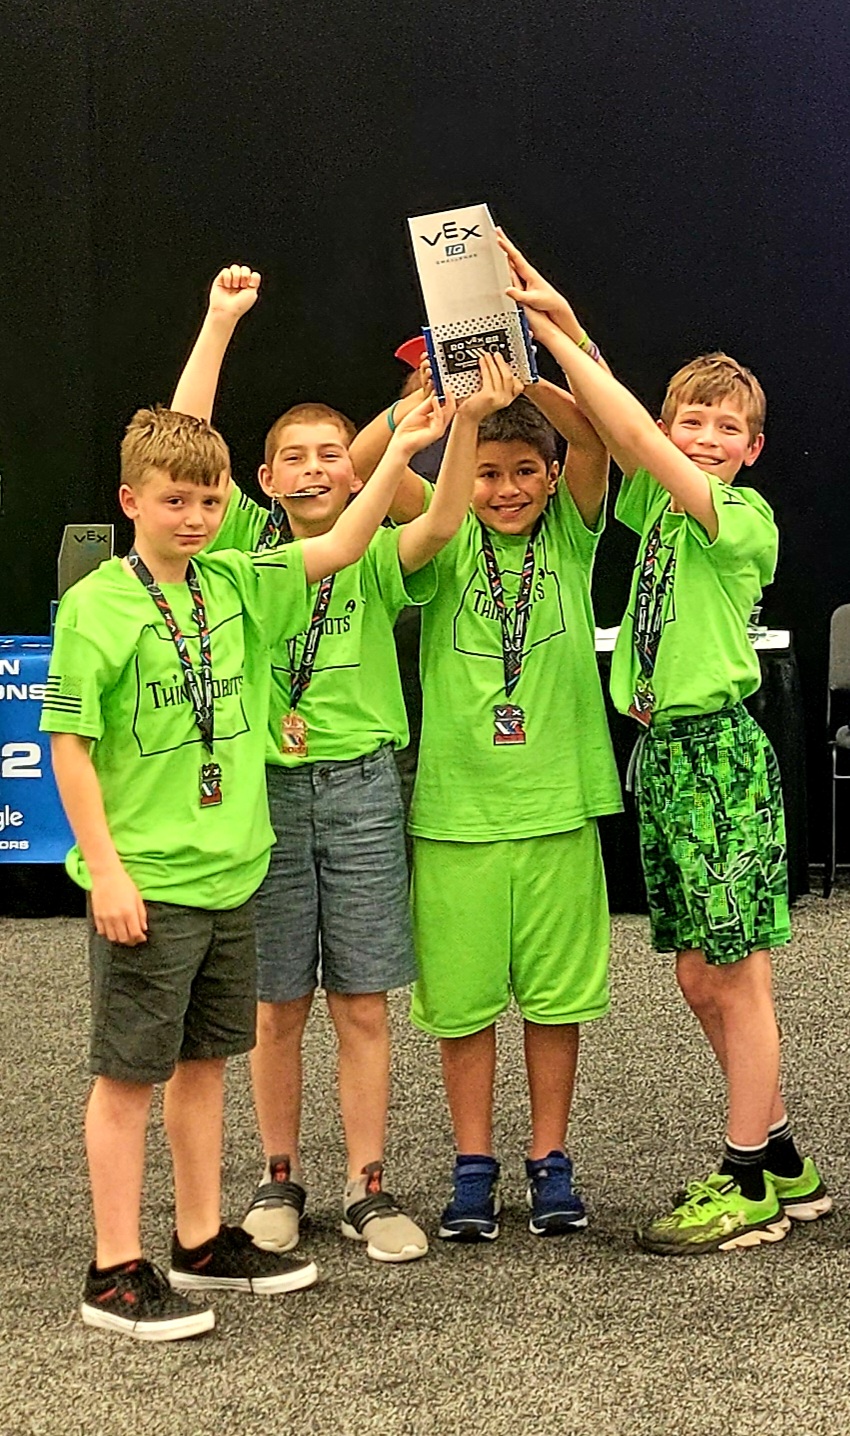 Local robot makers Noah Stoneking, left, Aiden Adams, John Lashley and Derek Schaefer, show off their trophy and medals after finishing 2nd in their division at an international event in Dallas, Texas. 